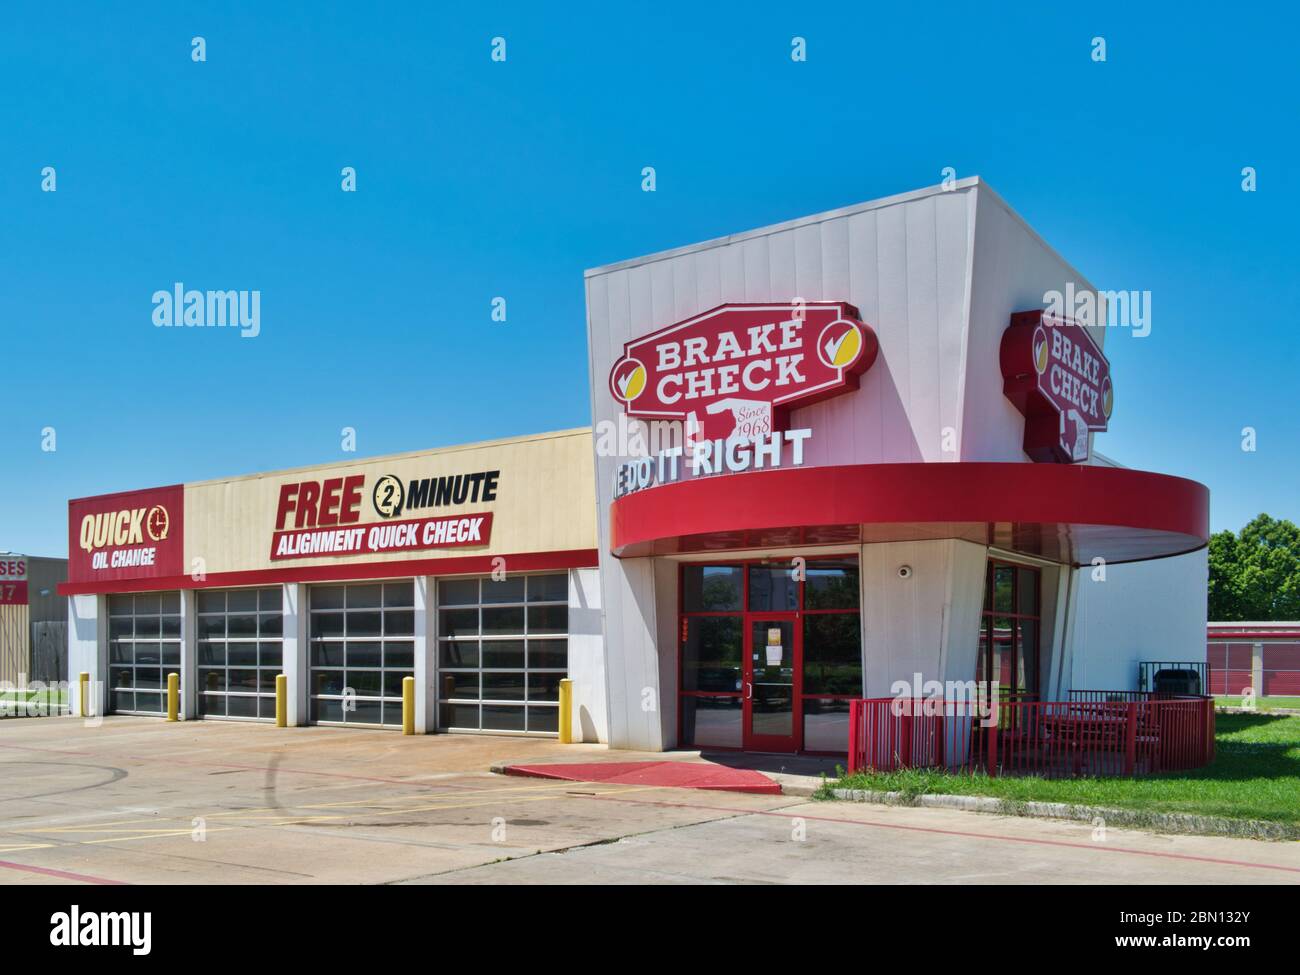 Brake Check automotive business exterior in Humble, TX located on North Sam Houston Pkwy. Texas chain store founded in 1968. Stock Photo